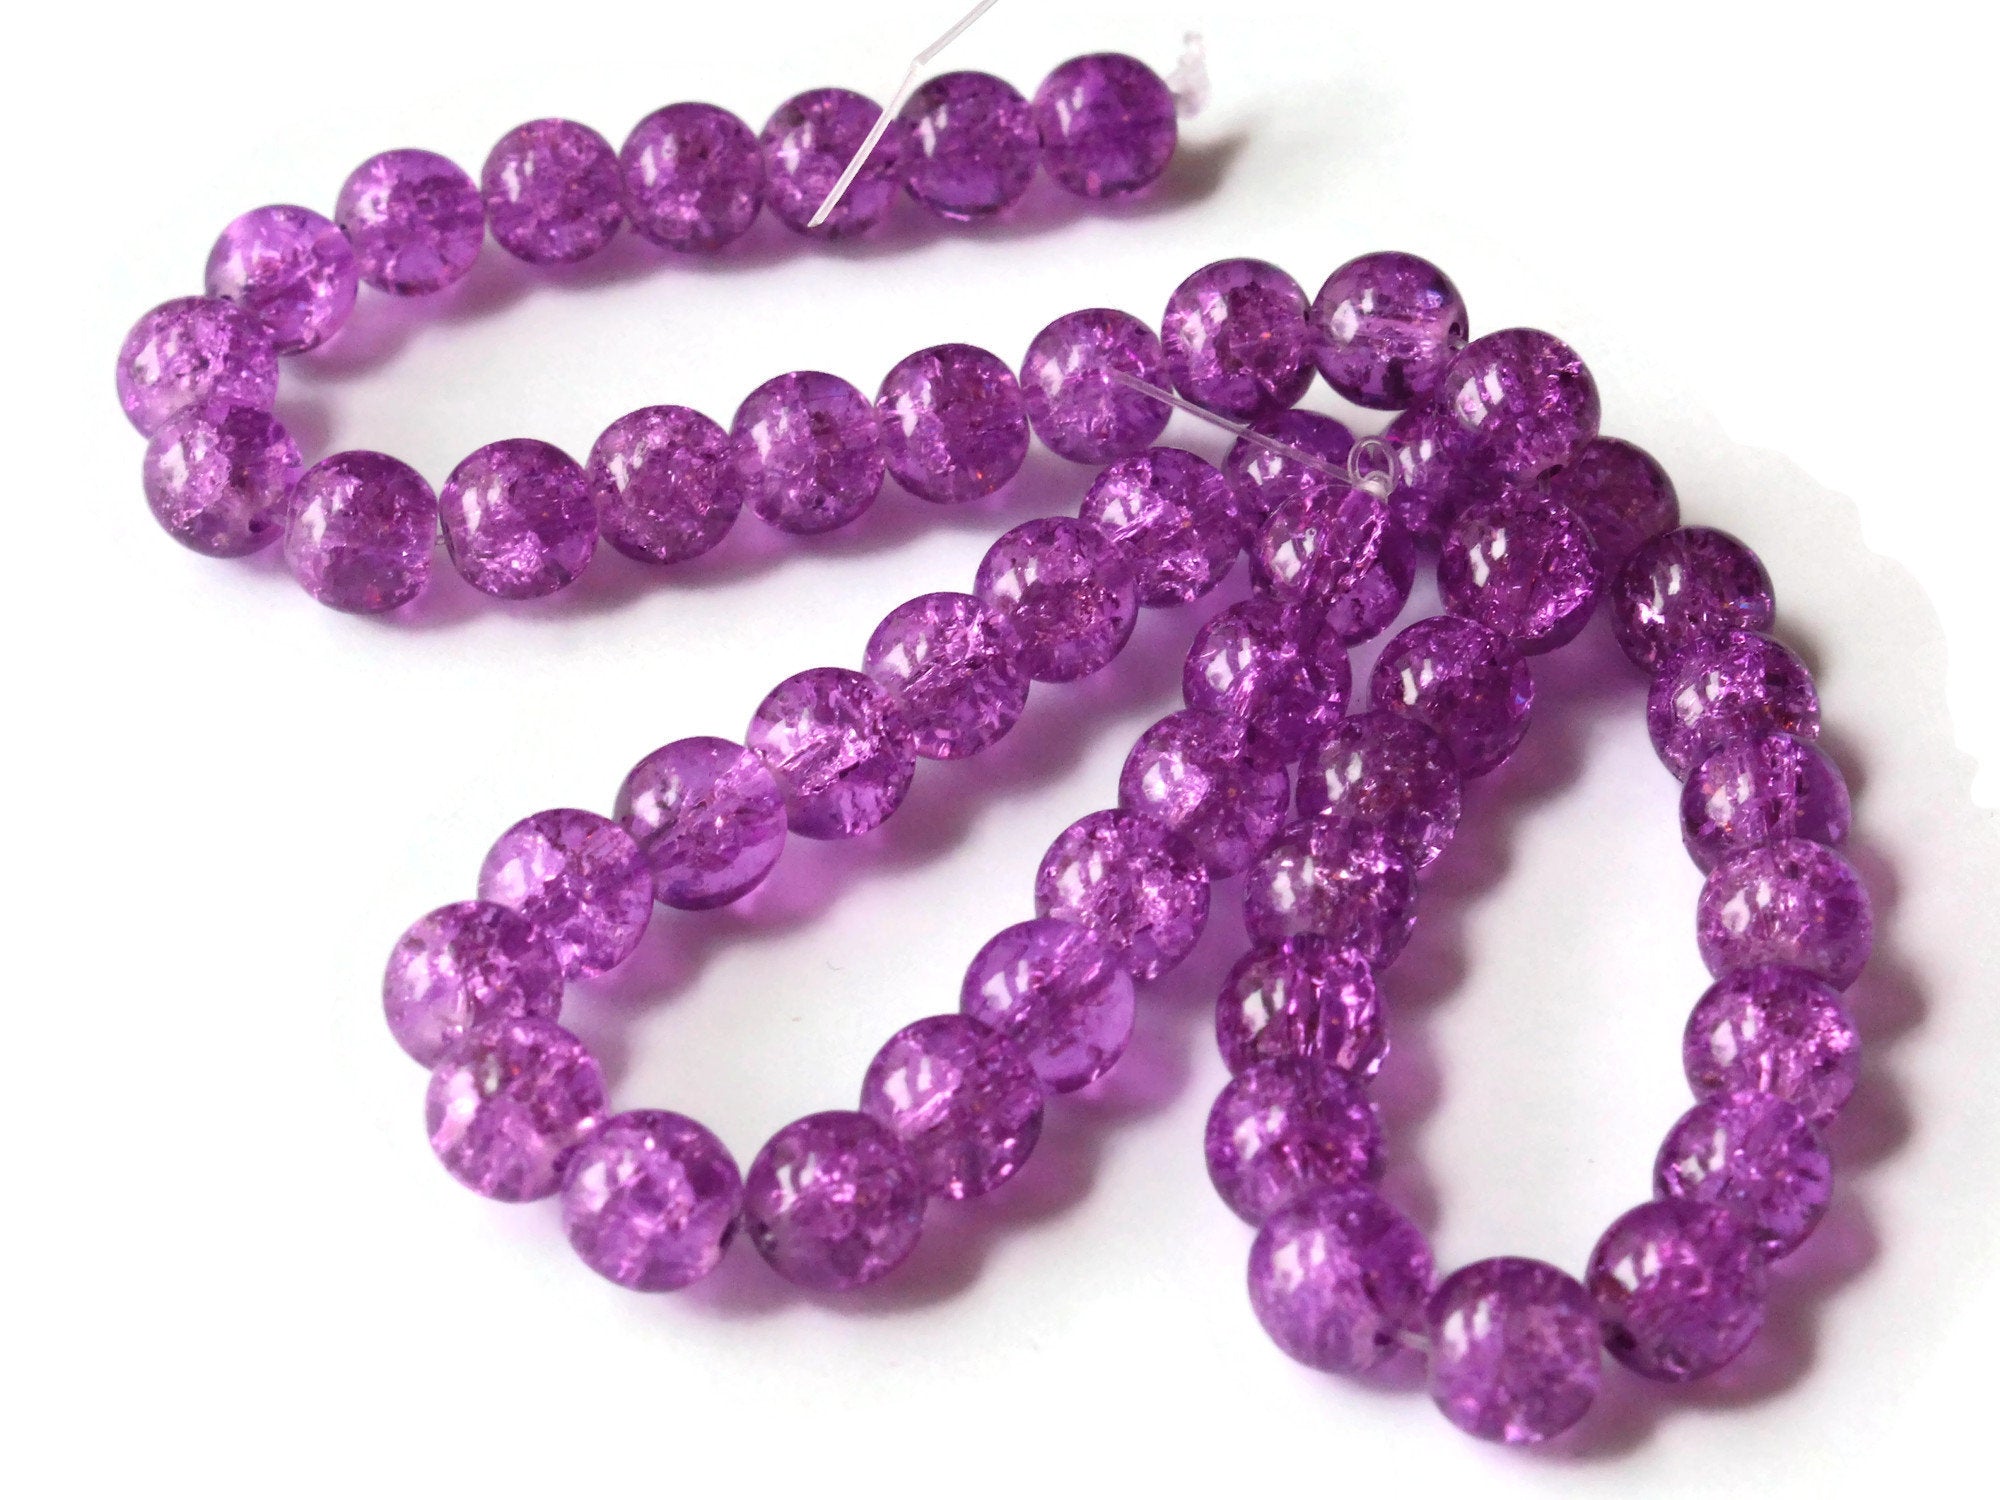 Elegant Purple Glass Beads for Jewelry Making, 8mm Polished Round Bead